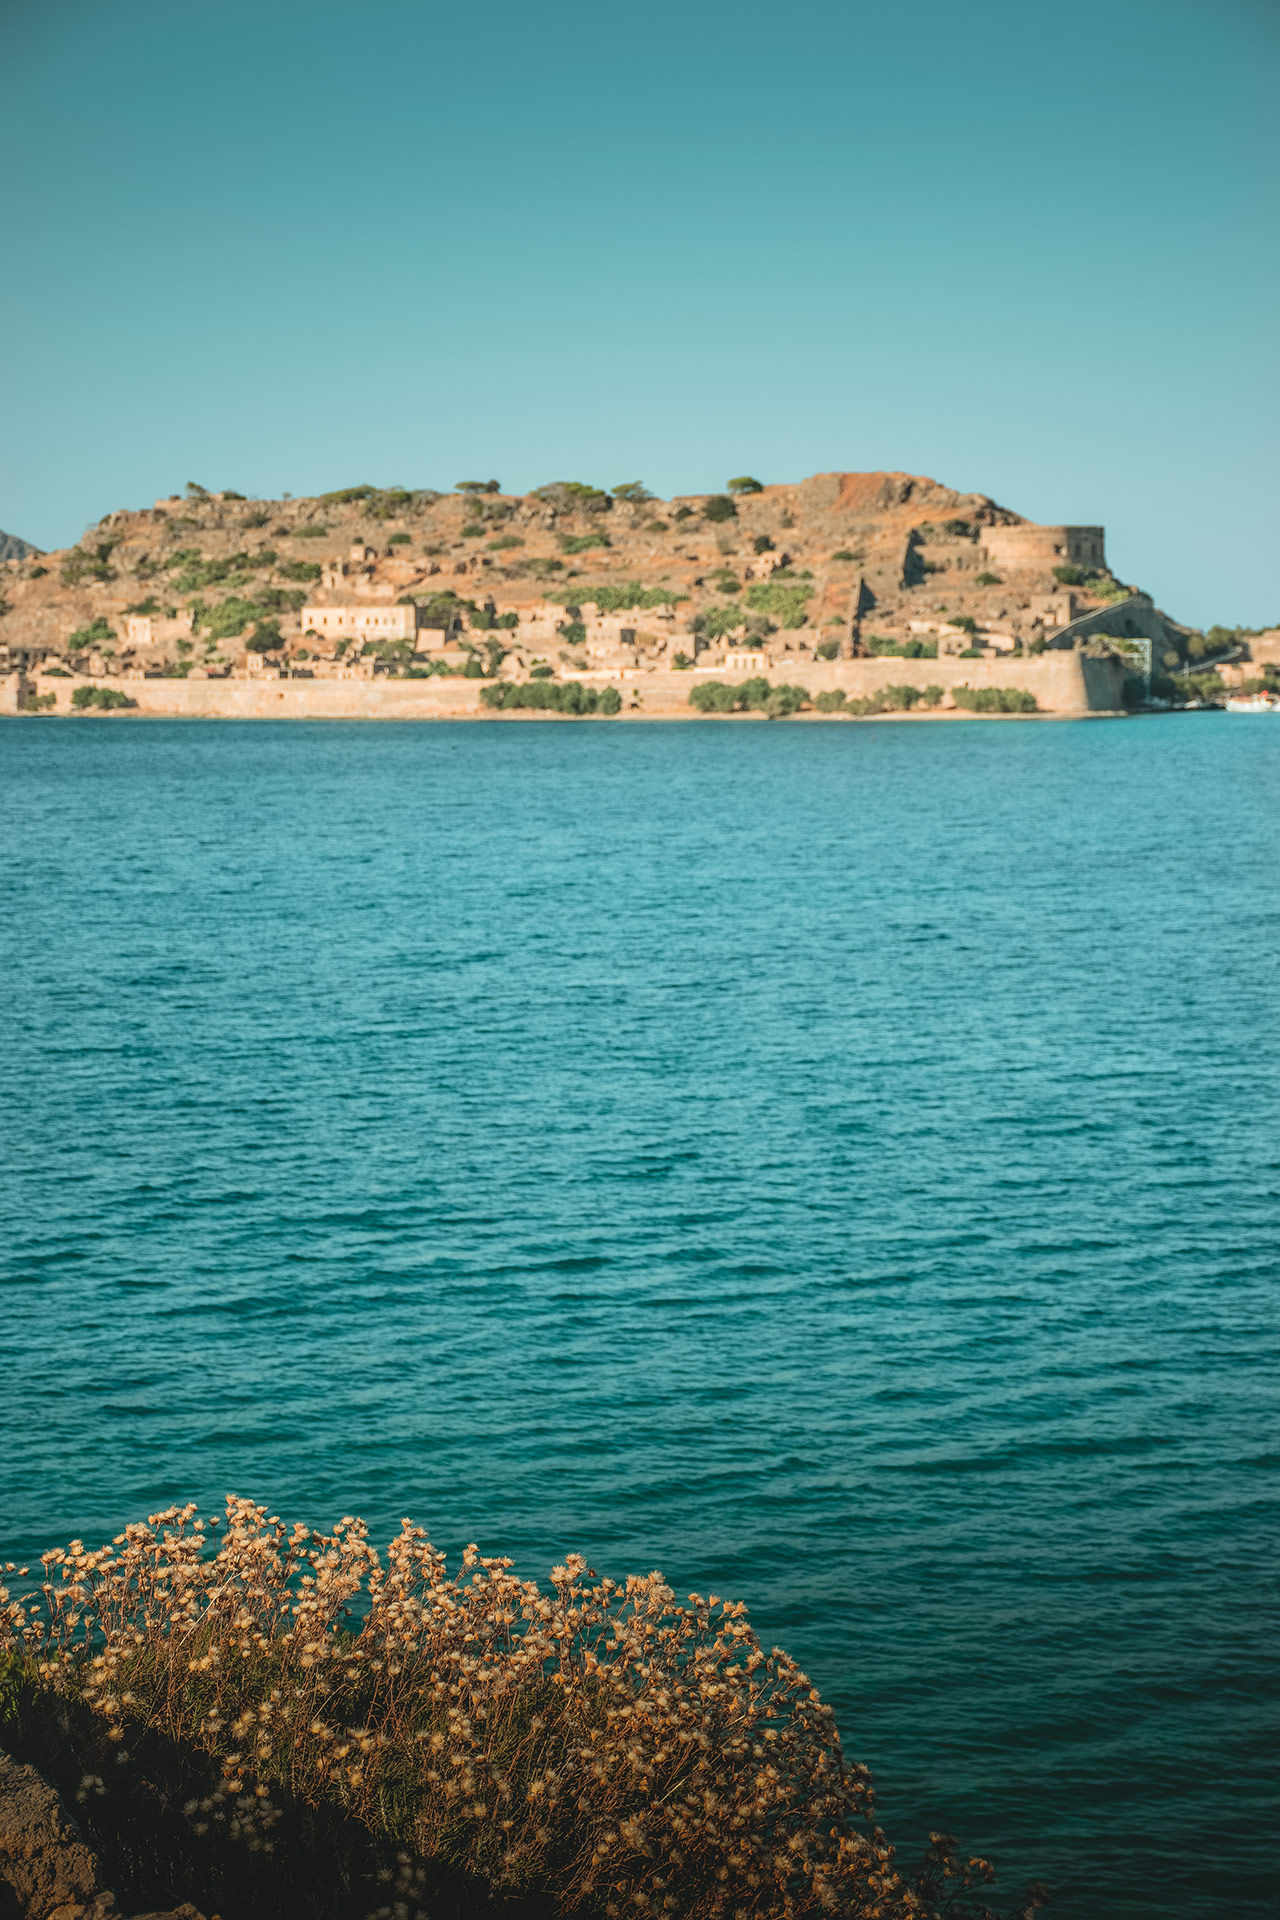 Spinalonga was the setting for Victoria Hislop’s best-selling novel The Island